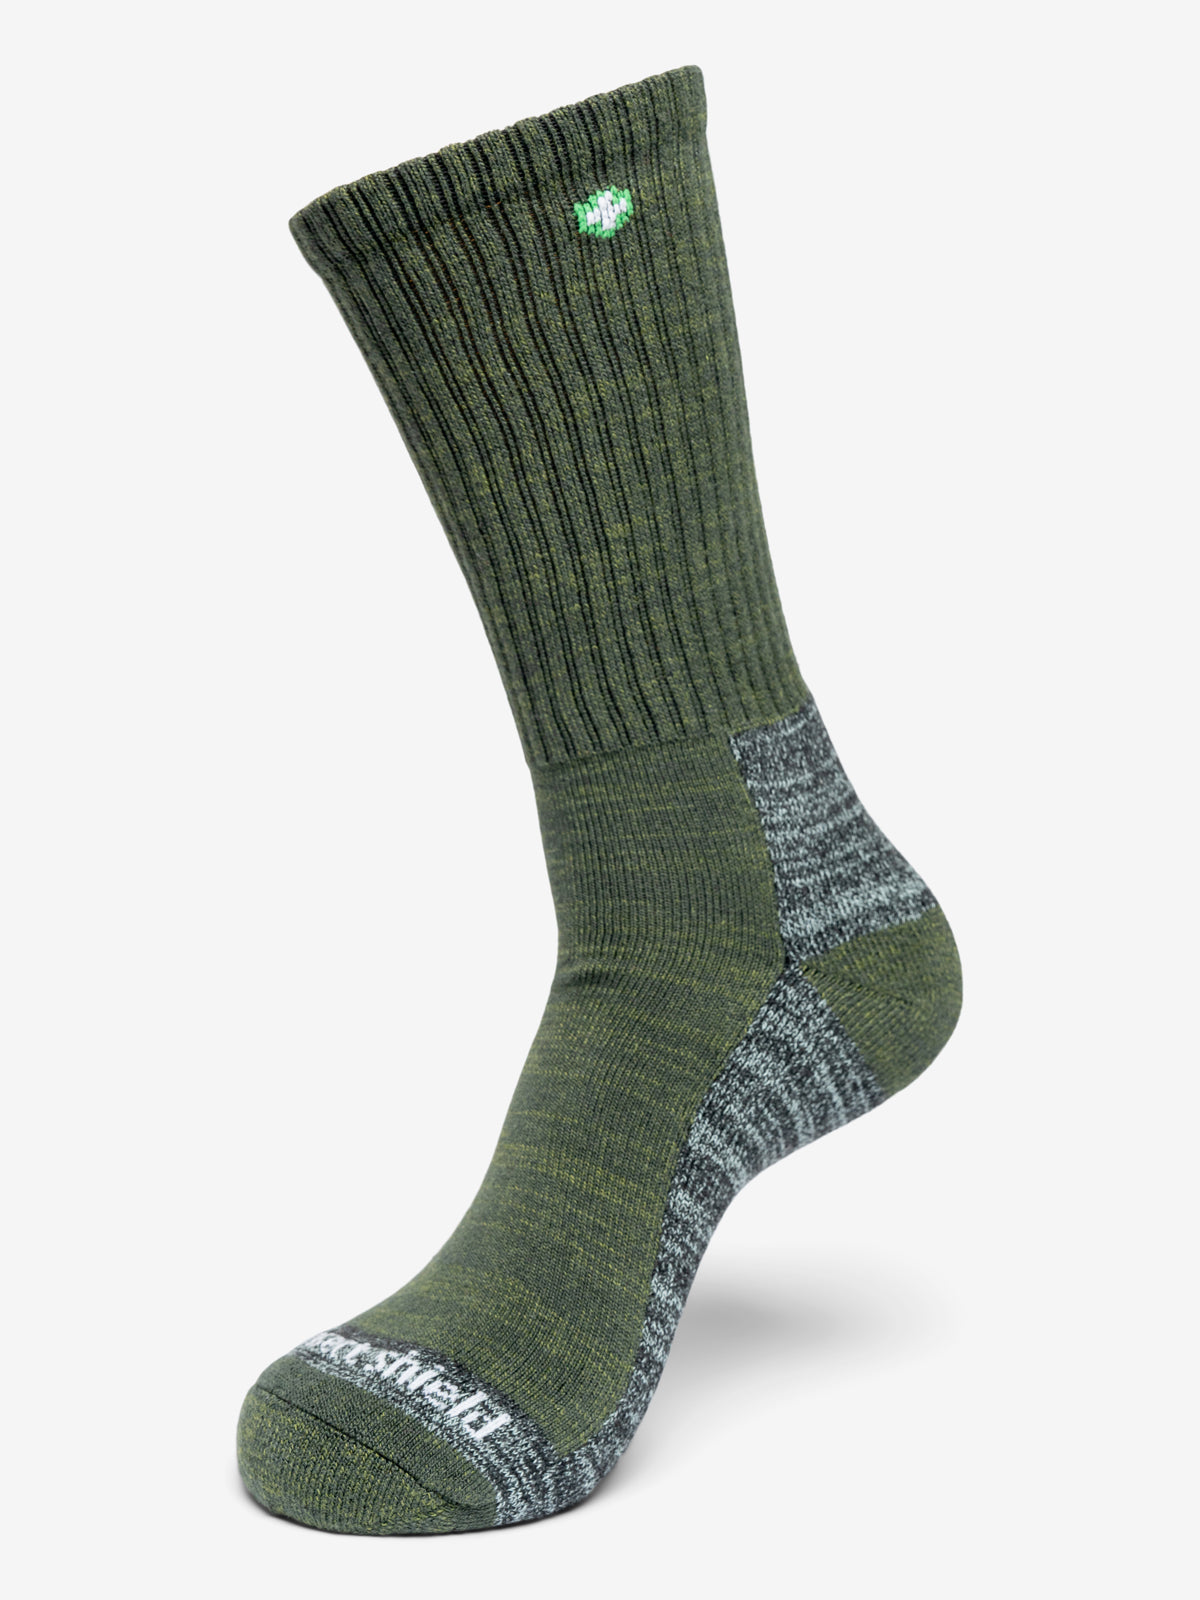 Tick Repellent Hiking Socks  Repel Insect and Prevent Bug Bites – Insect  Shield